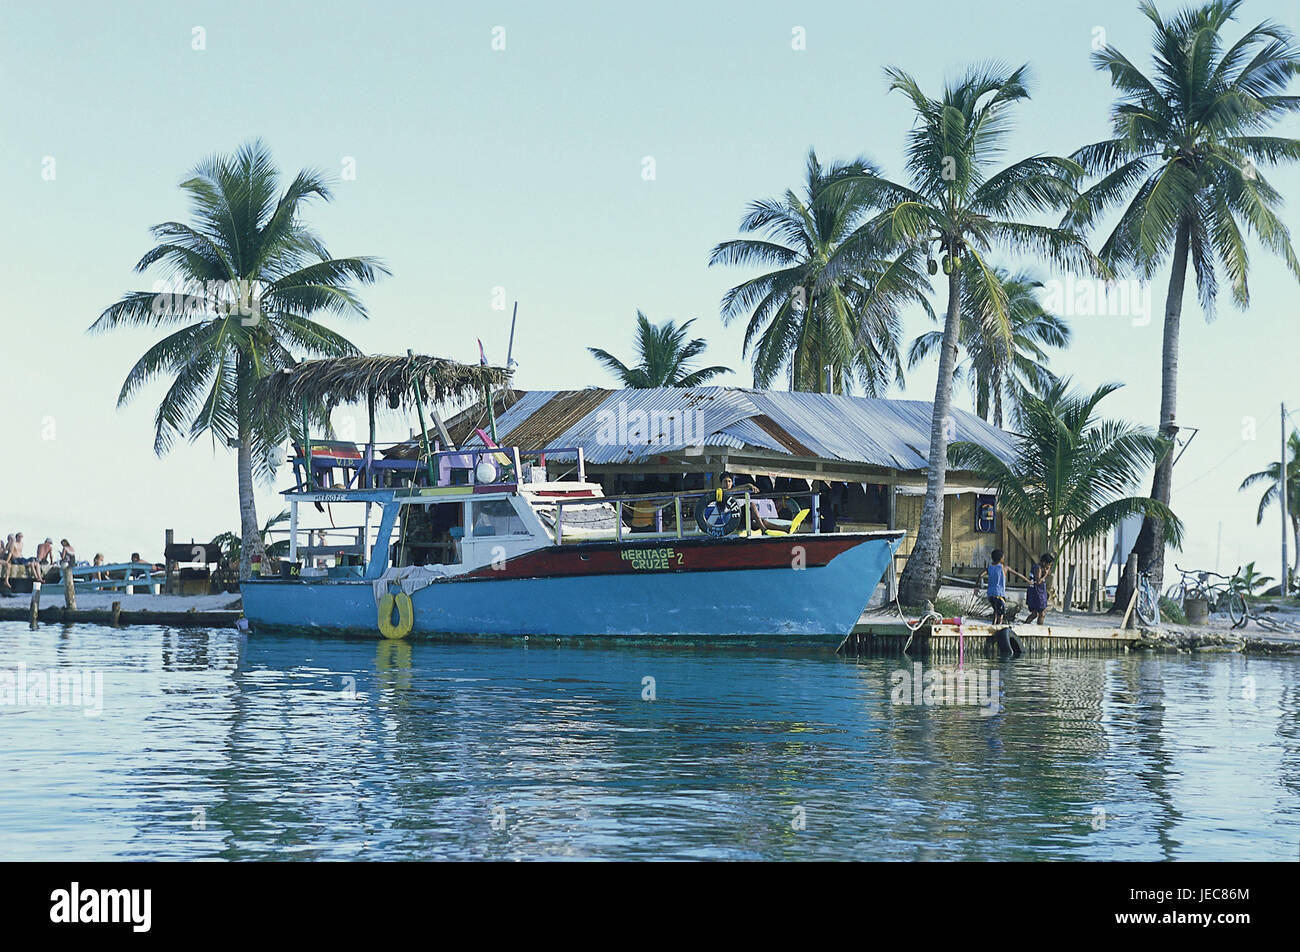 Belize, island Caye Caulker, landing stage, boat, palms, Central America, harbour, fishing boat, excursion boat, tourism, brightly, paints, sea, water, building, corrugated iron, outside, Stock Photo